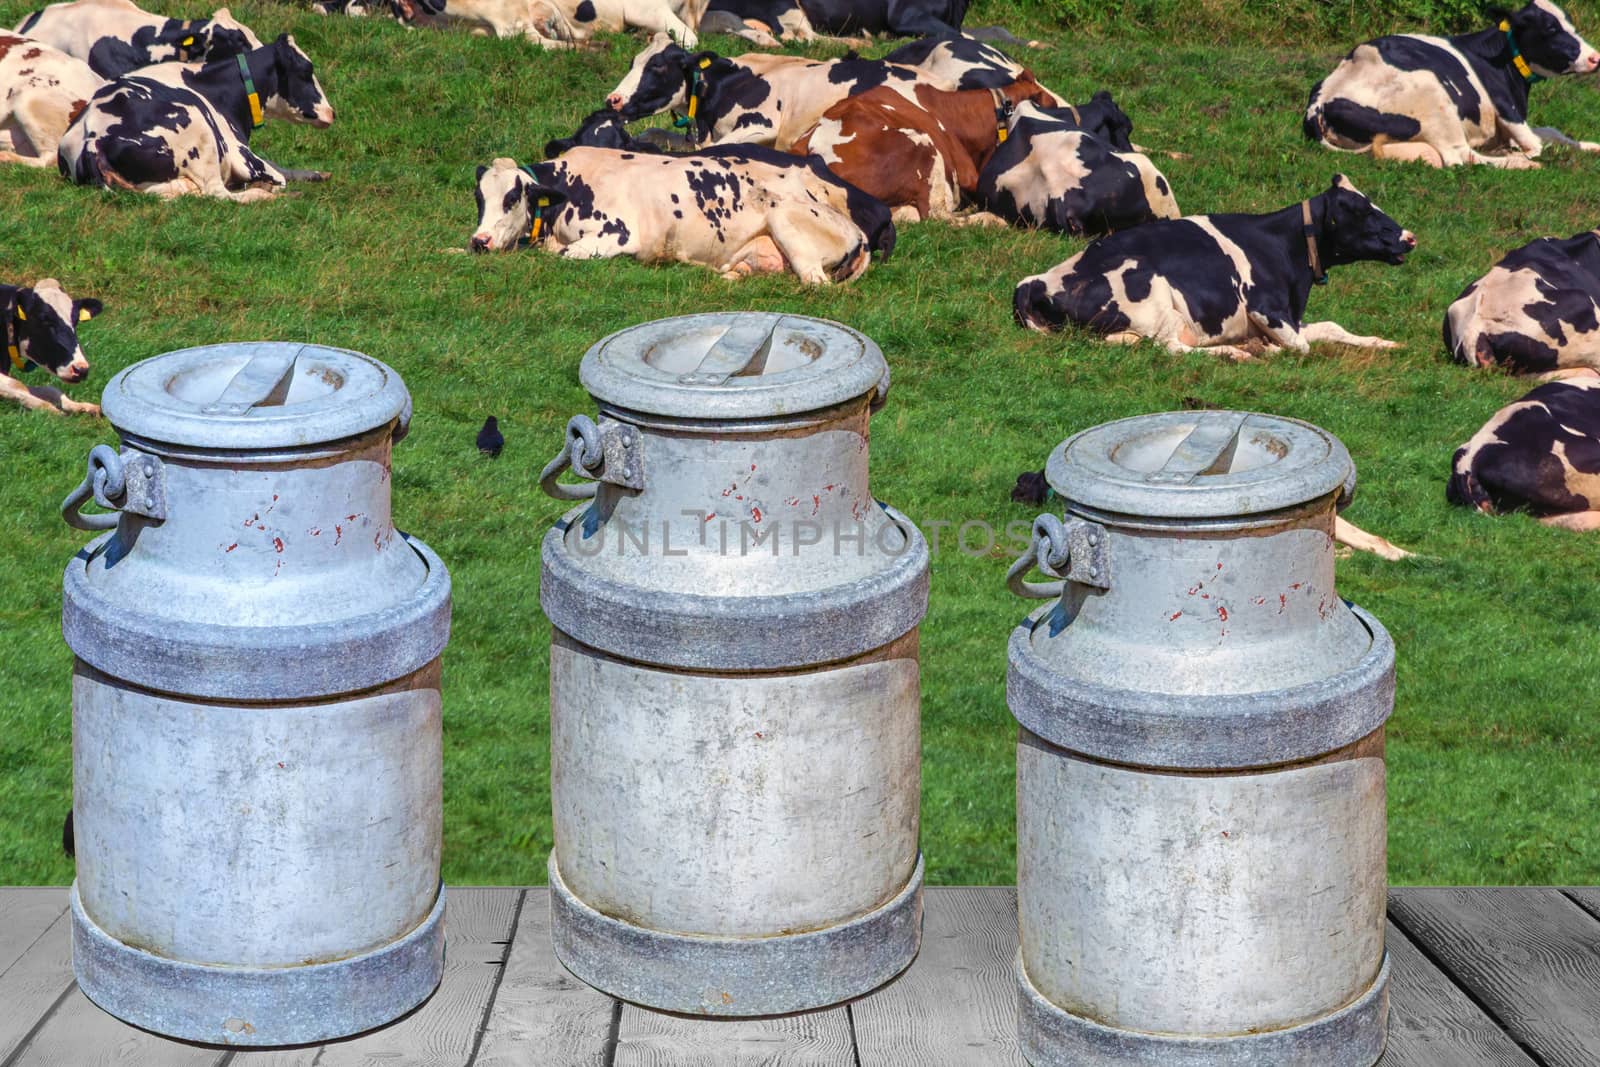 Cows of a dairy grazing on fields of a farm in the foreground 3 milk churns.